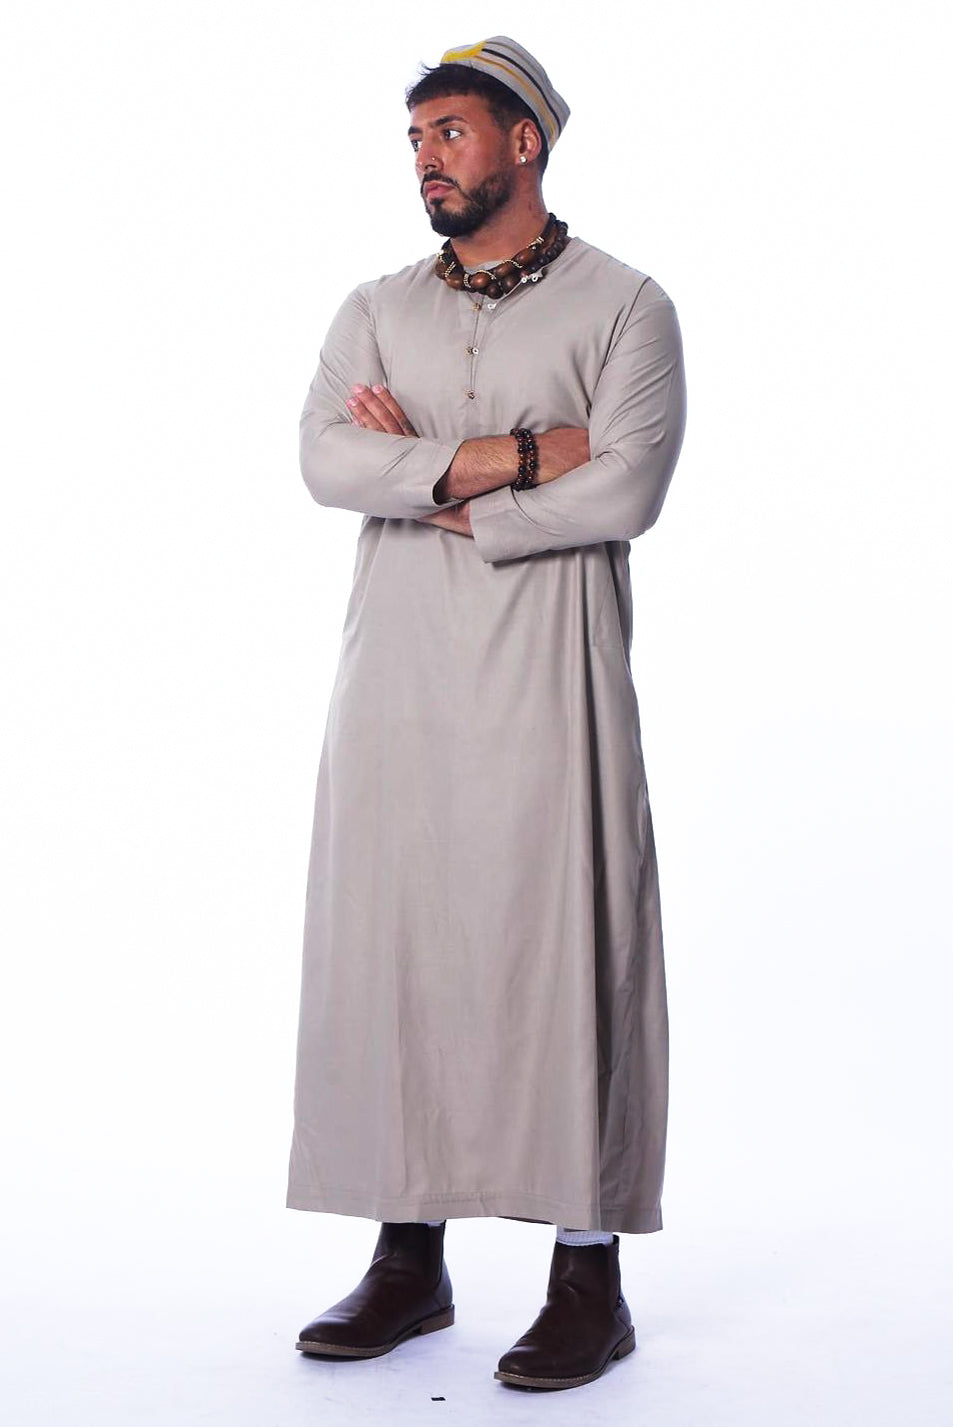 Photo of a man wearing myObioma's long and beige Moroccan Kaftan. The one-piece traditional dress is made with a soft fabric and includes a loose and sheath silhouette for comfort. It features subtle buttons at the upper chest for a simple decorative effect.